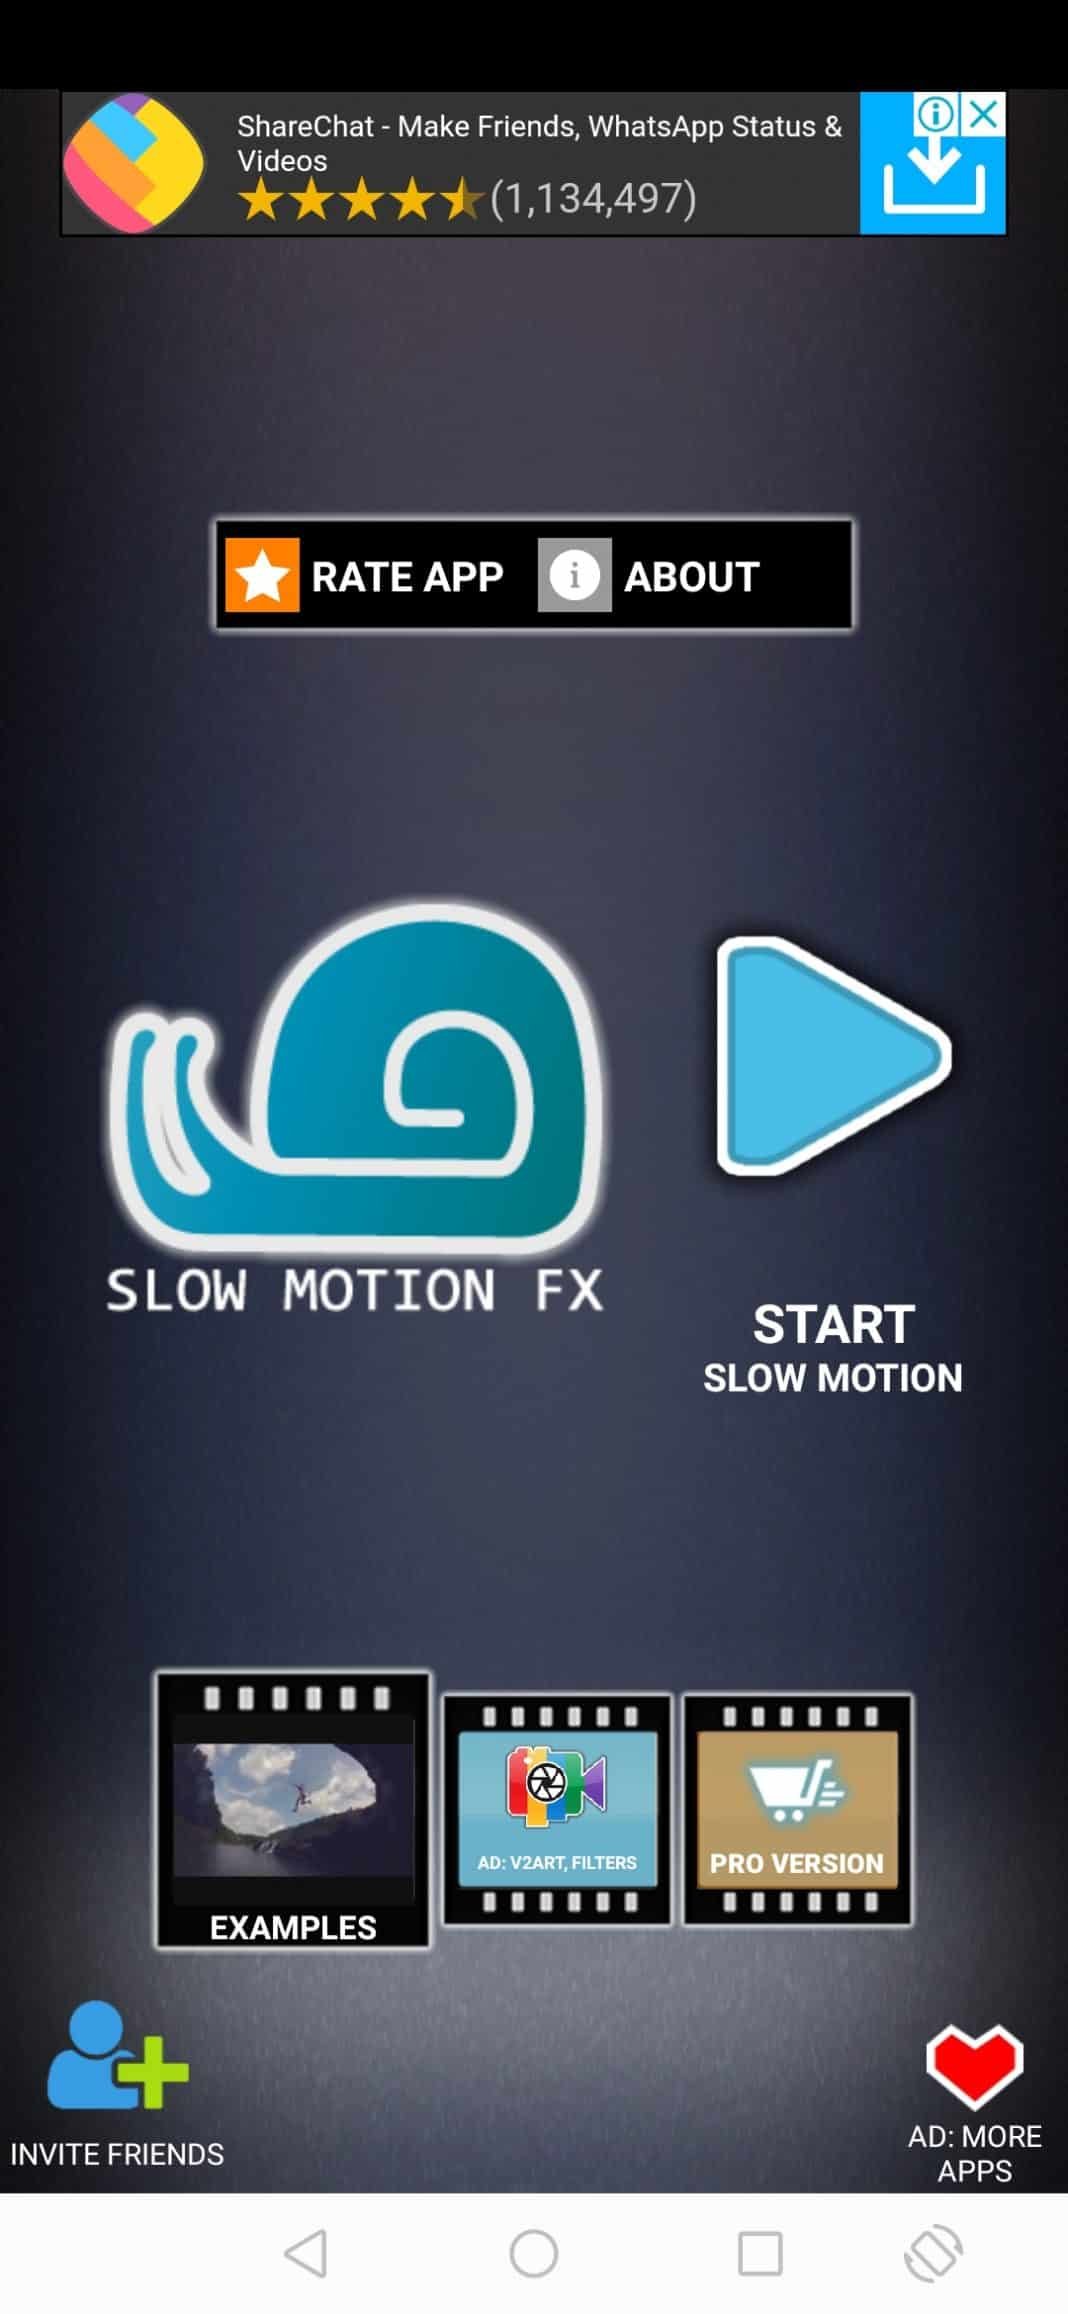 Enable Slow Motion Video in Any Android Device